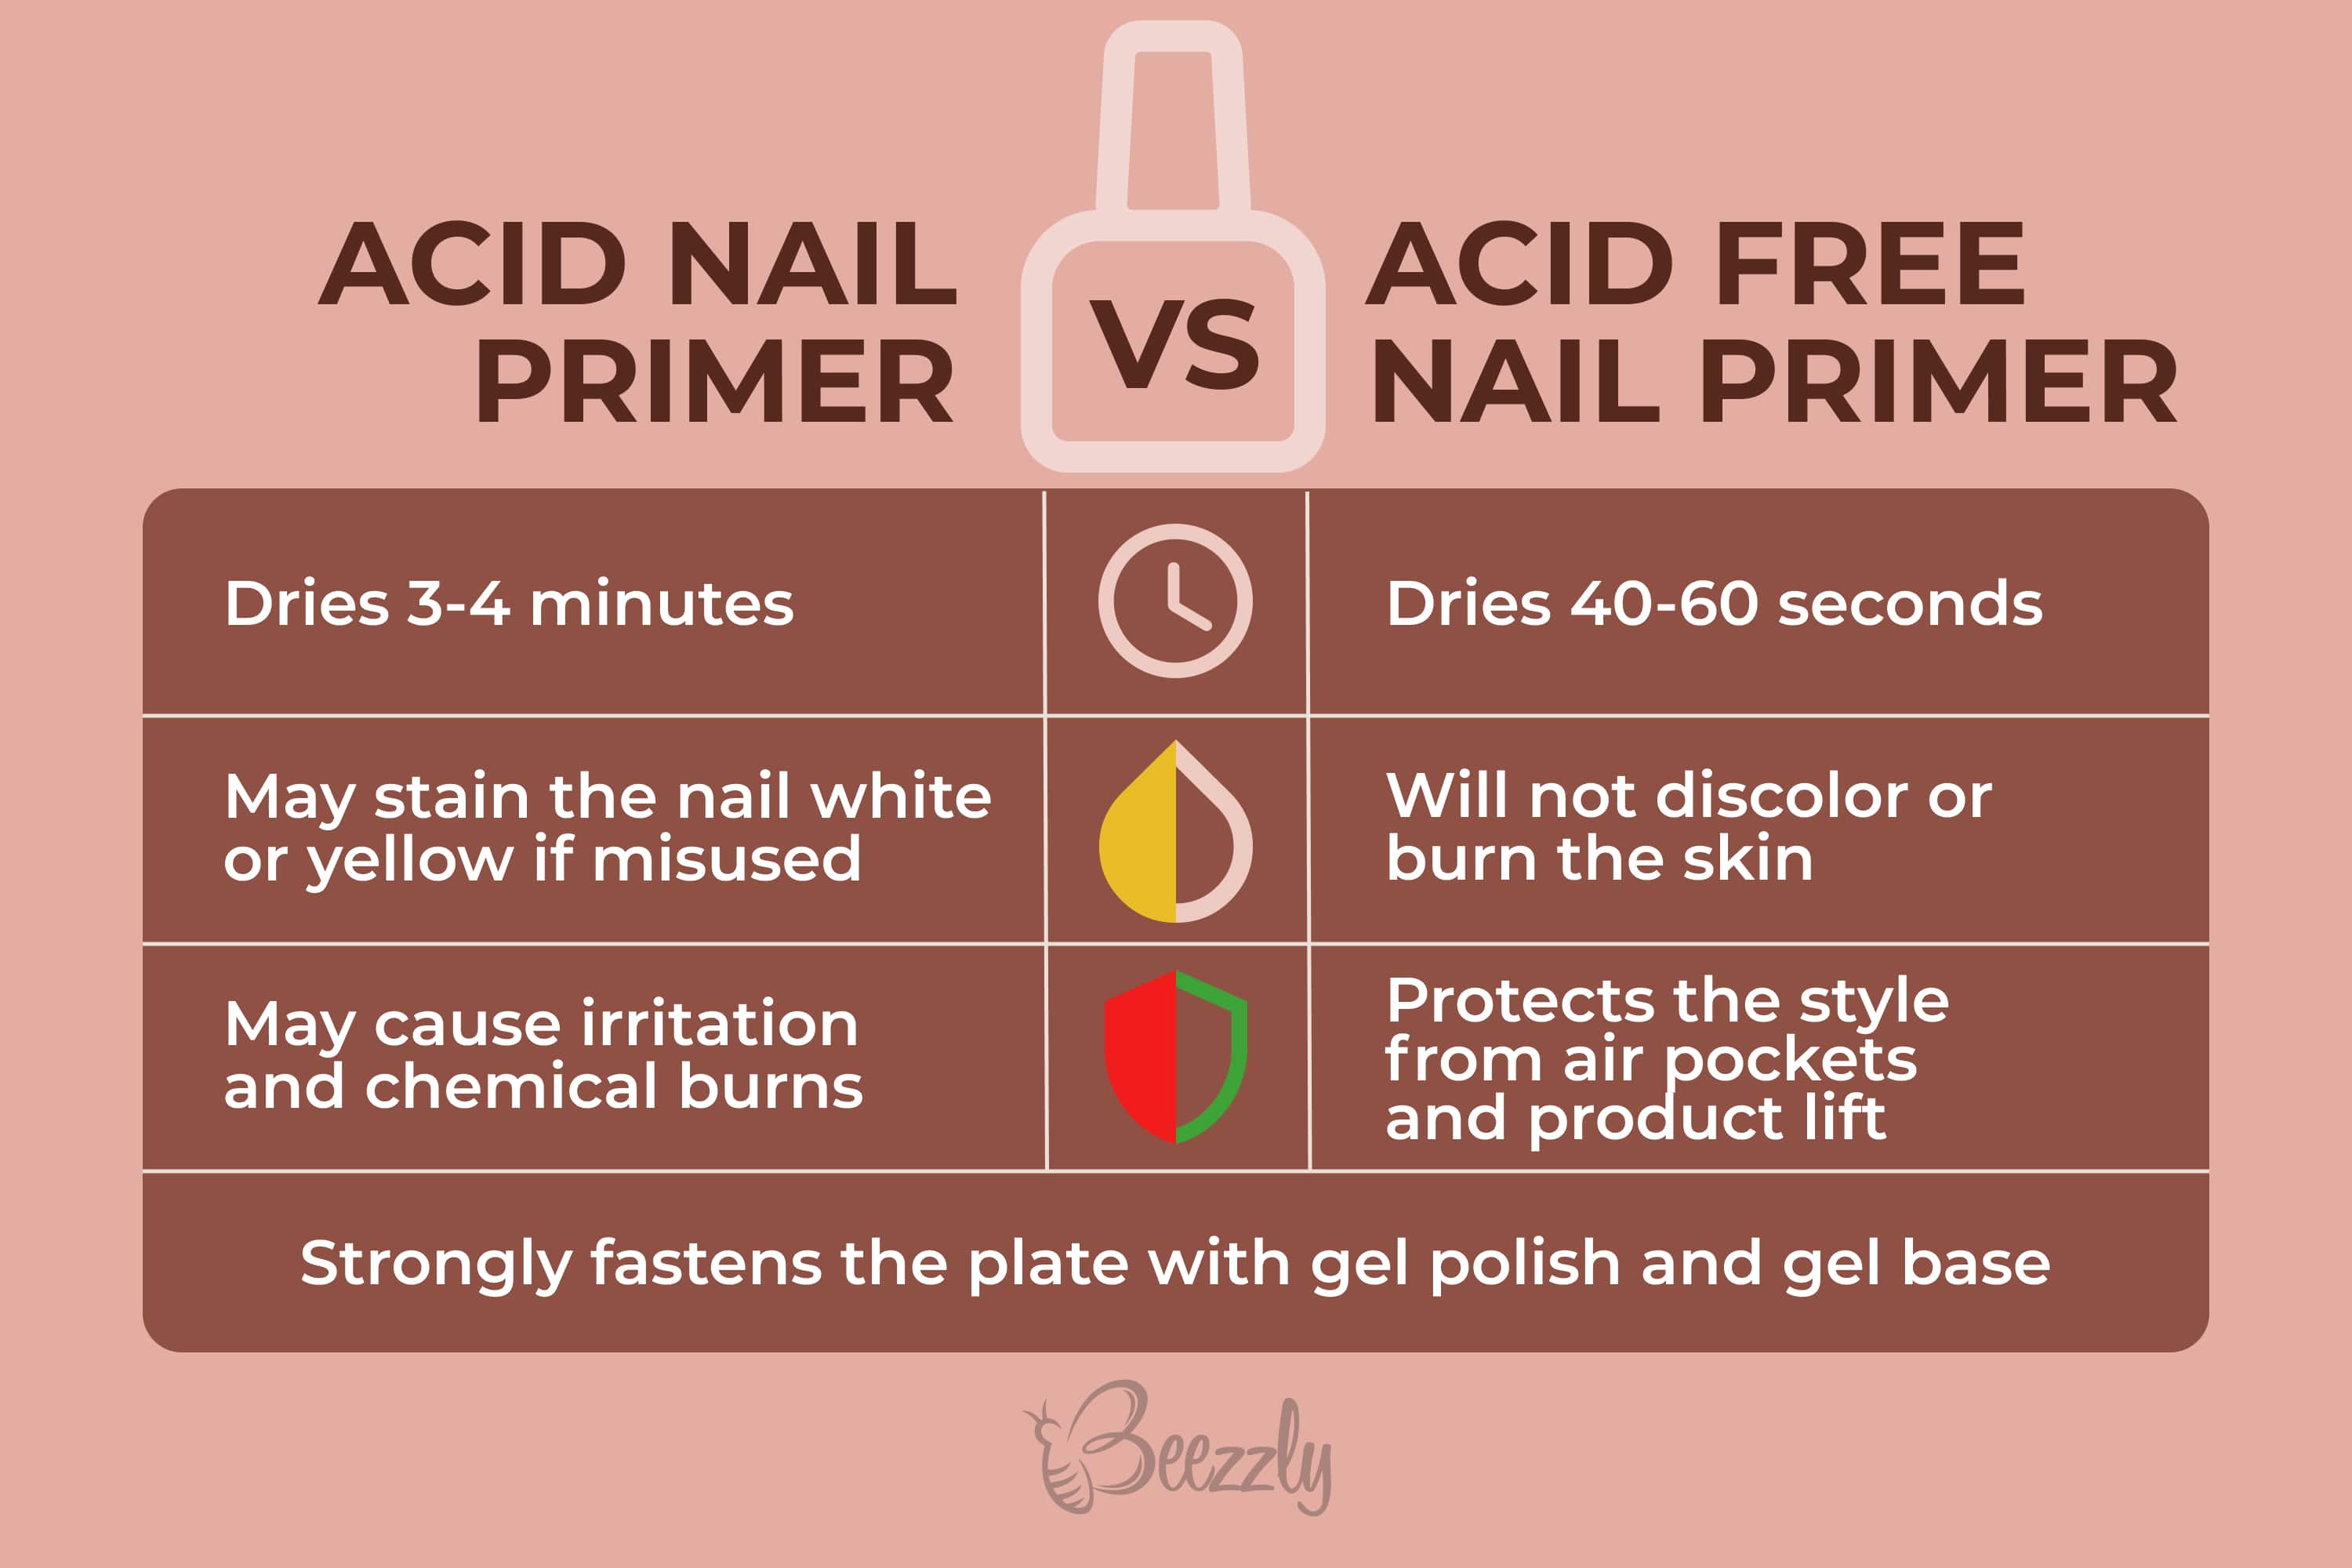 What Is the Difference Between a Non Acid Nail Primer And an Acid Primer